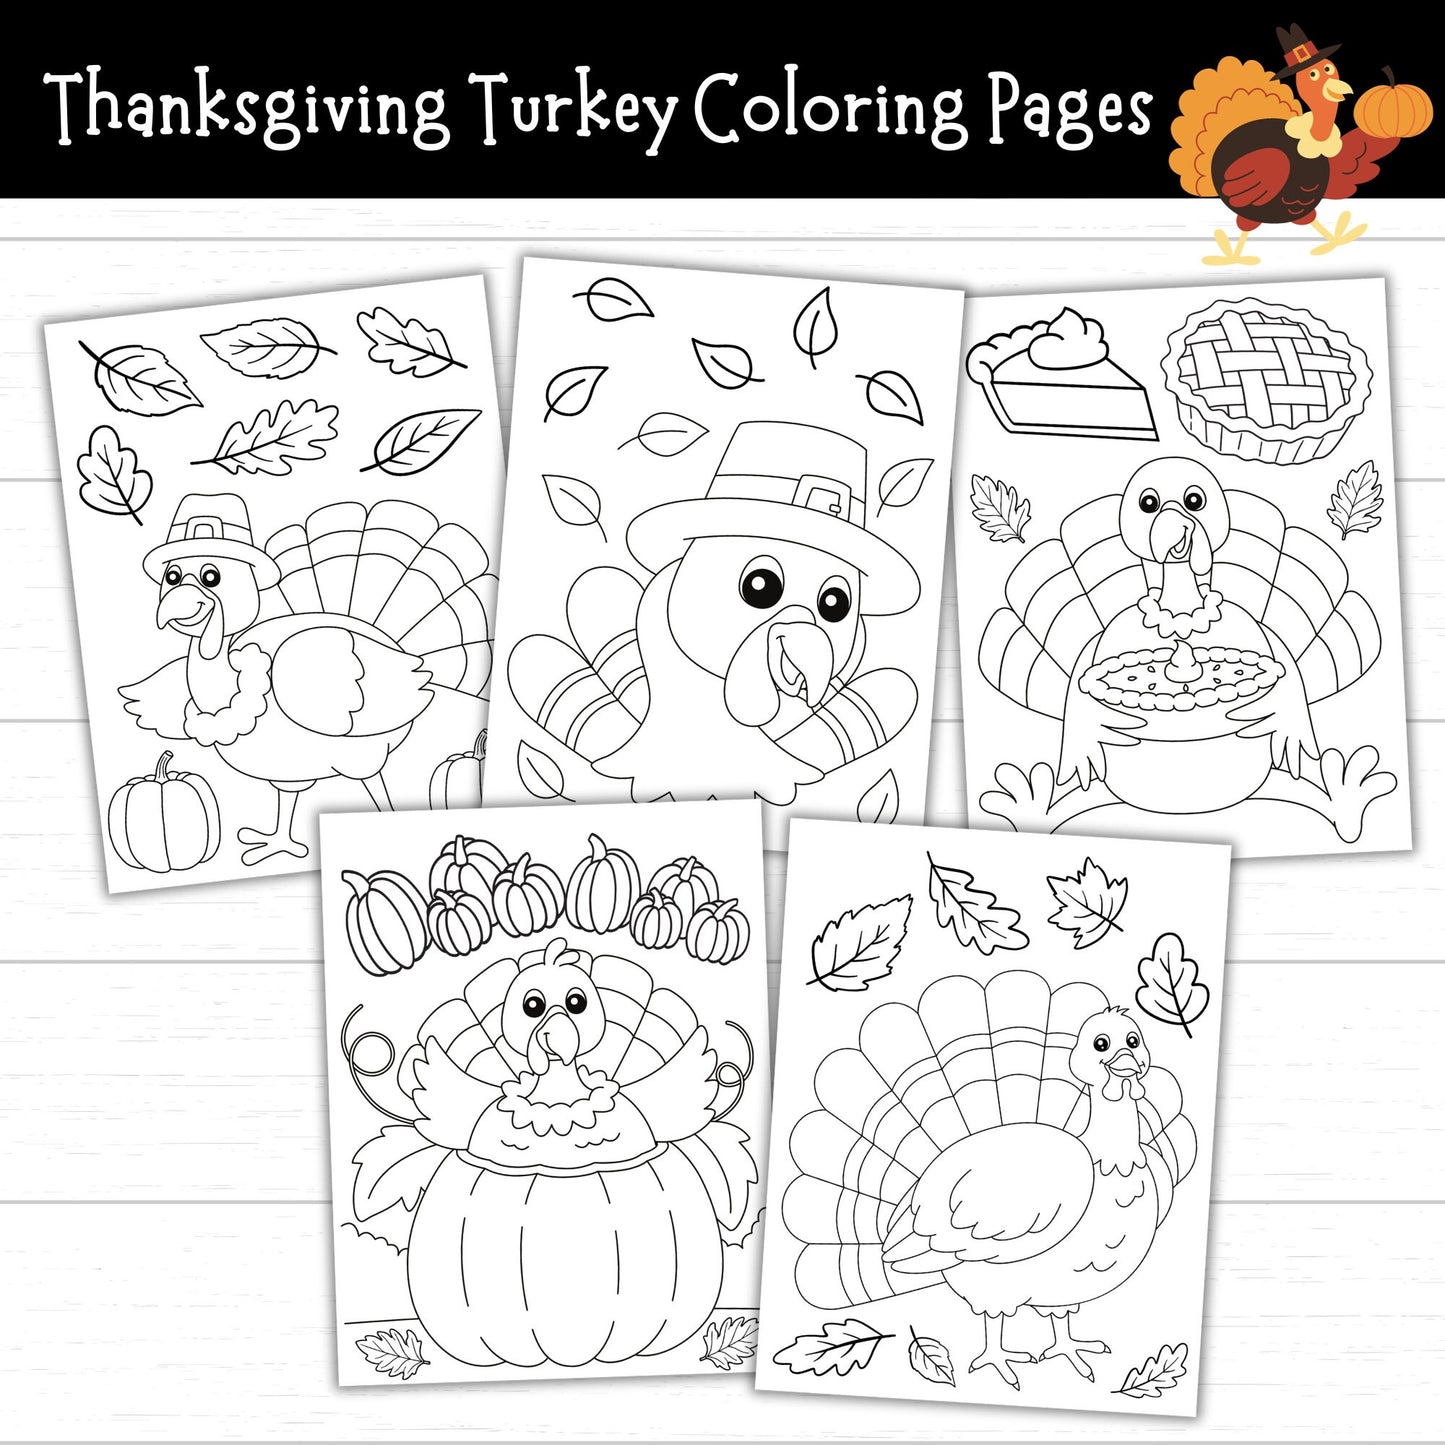 Thanksgiving Turkey Coloring Pages, Printable Turkey Coloring Pages, Turkey Printables, Thanksgiving Coloring Pages, Fall Coloring Pages